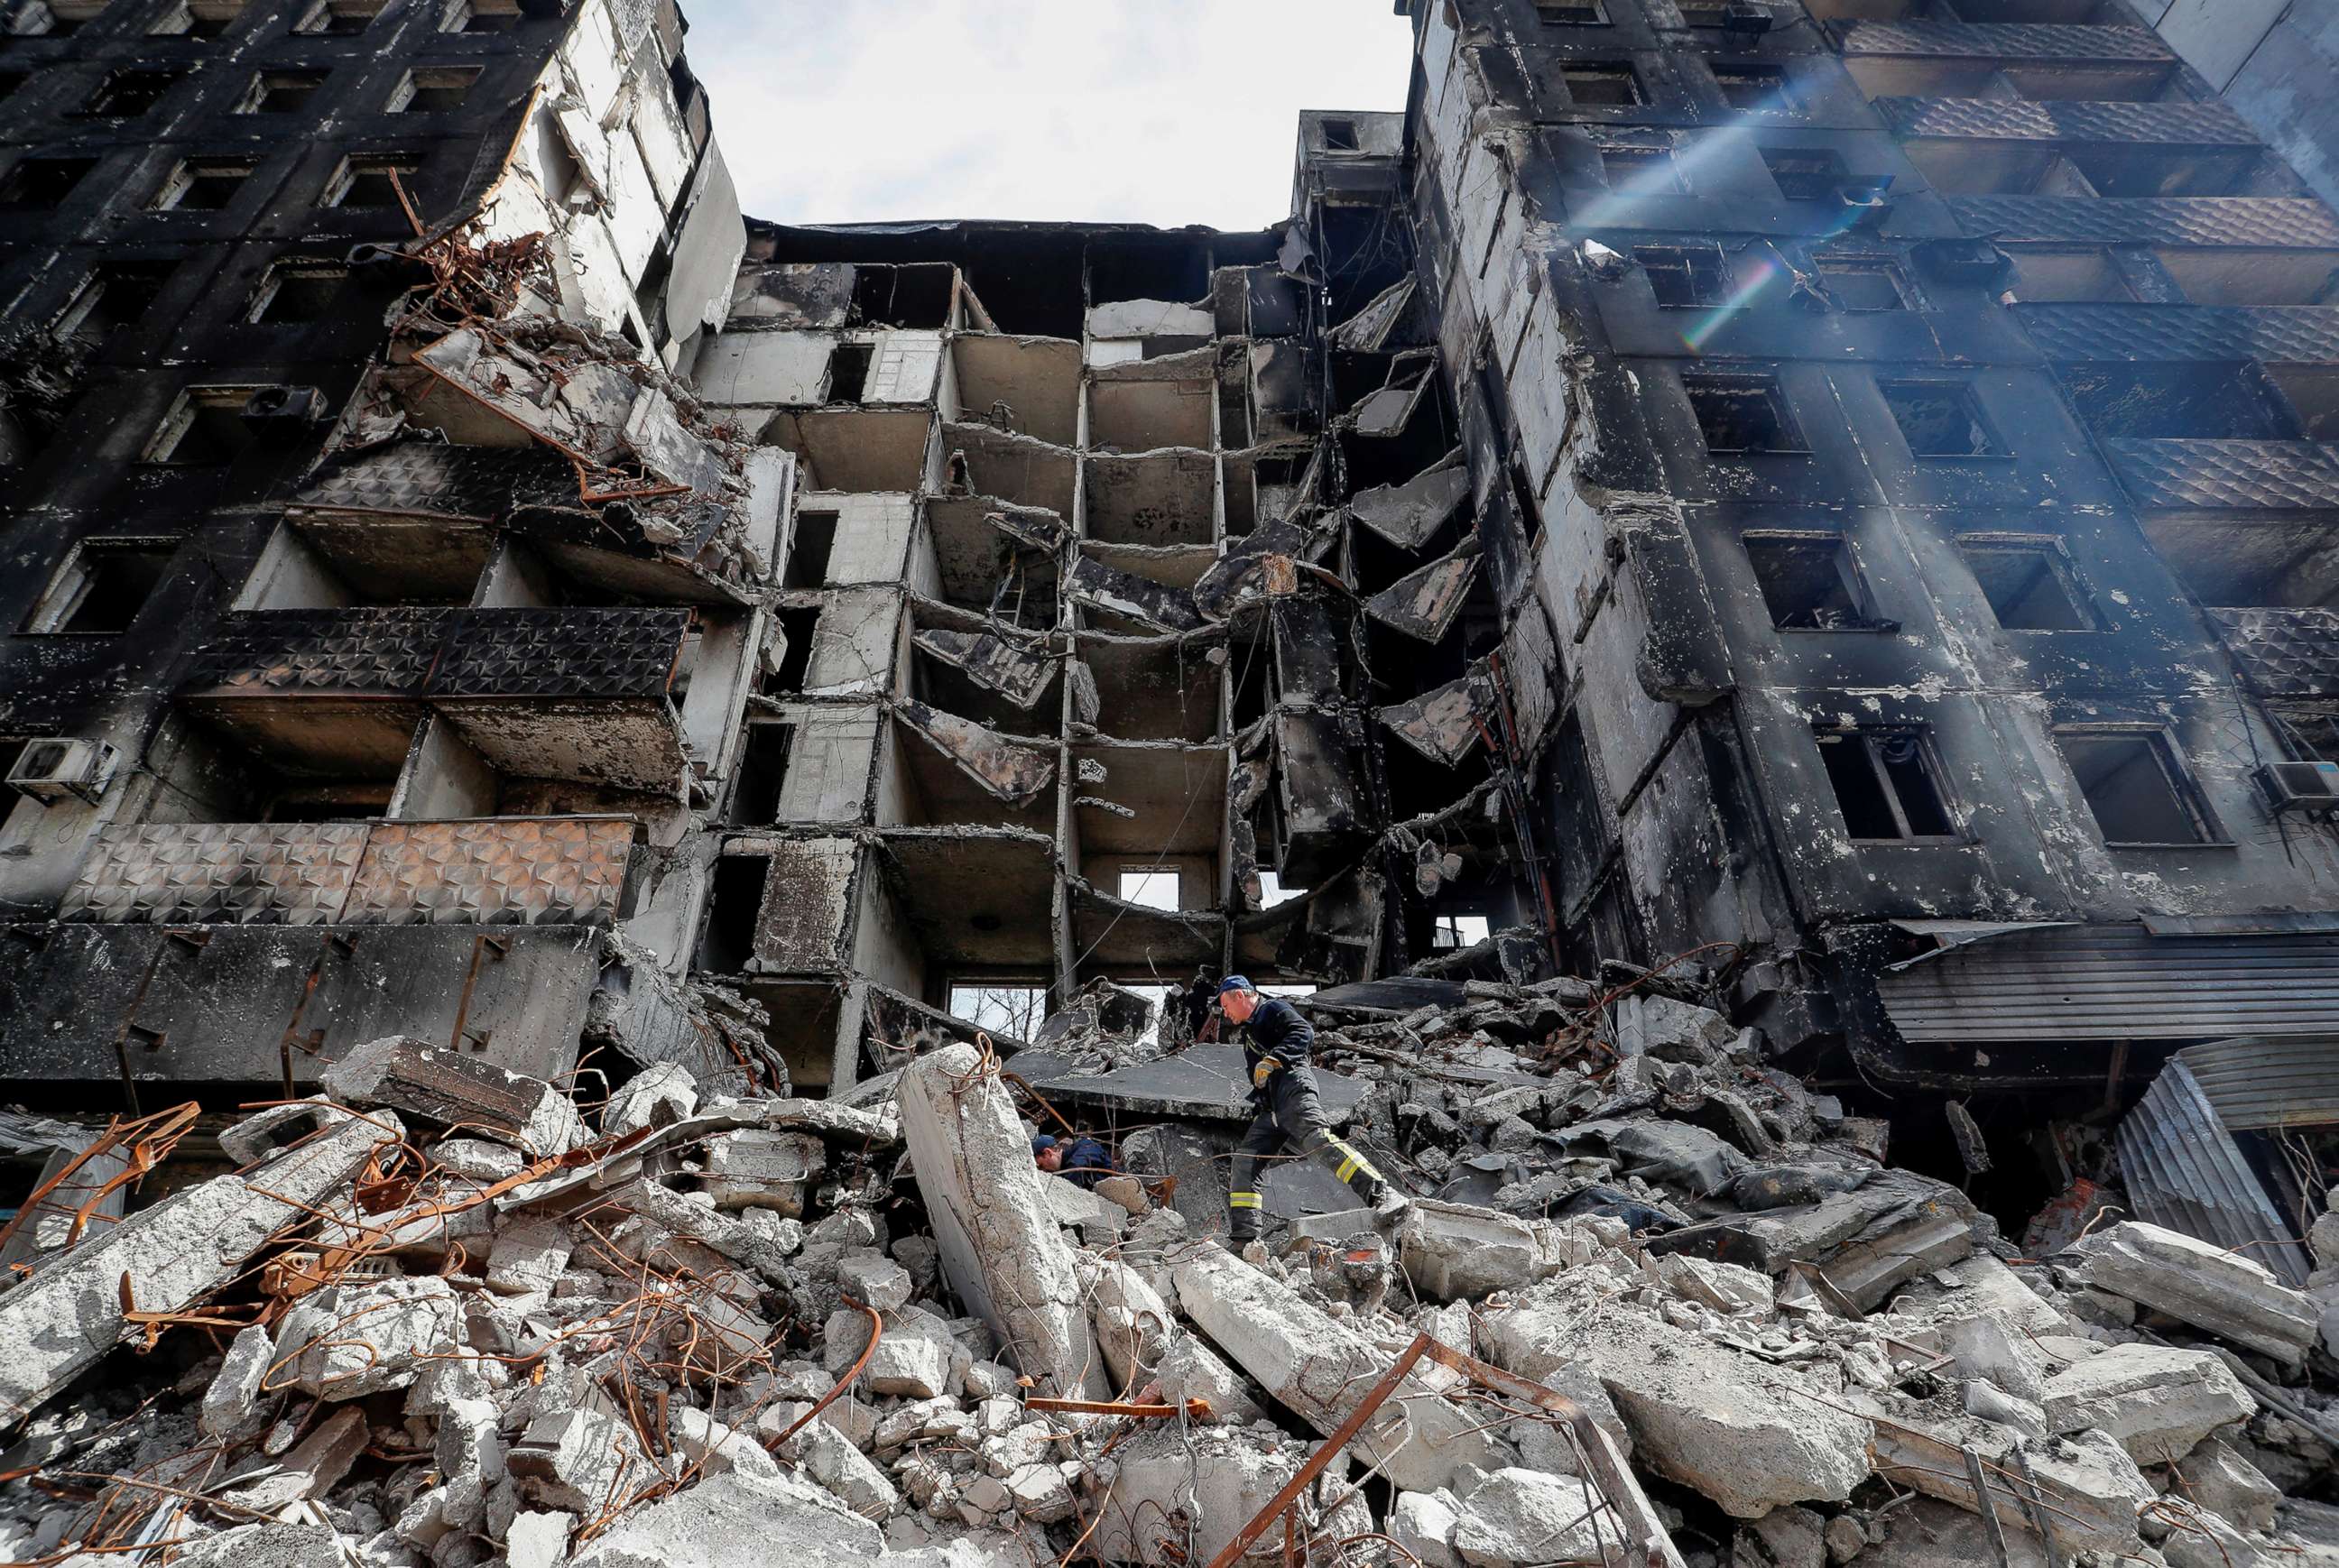 PHOTO: Emergency workers remove debris of a building destroyed in the course of the Ukraine-Russia conflict, in the southern port city of Mariupol, Ukraine April 10, 2022.